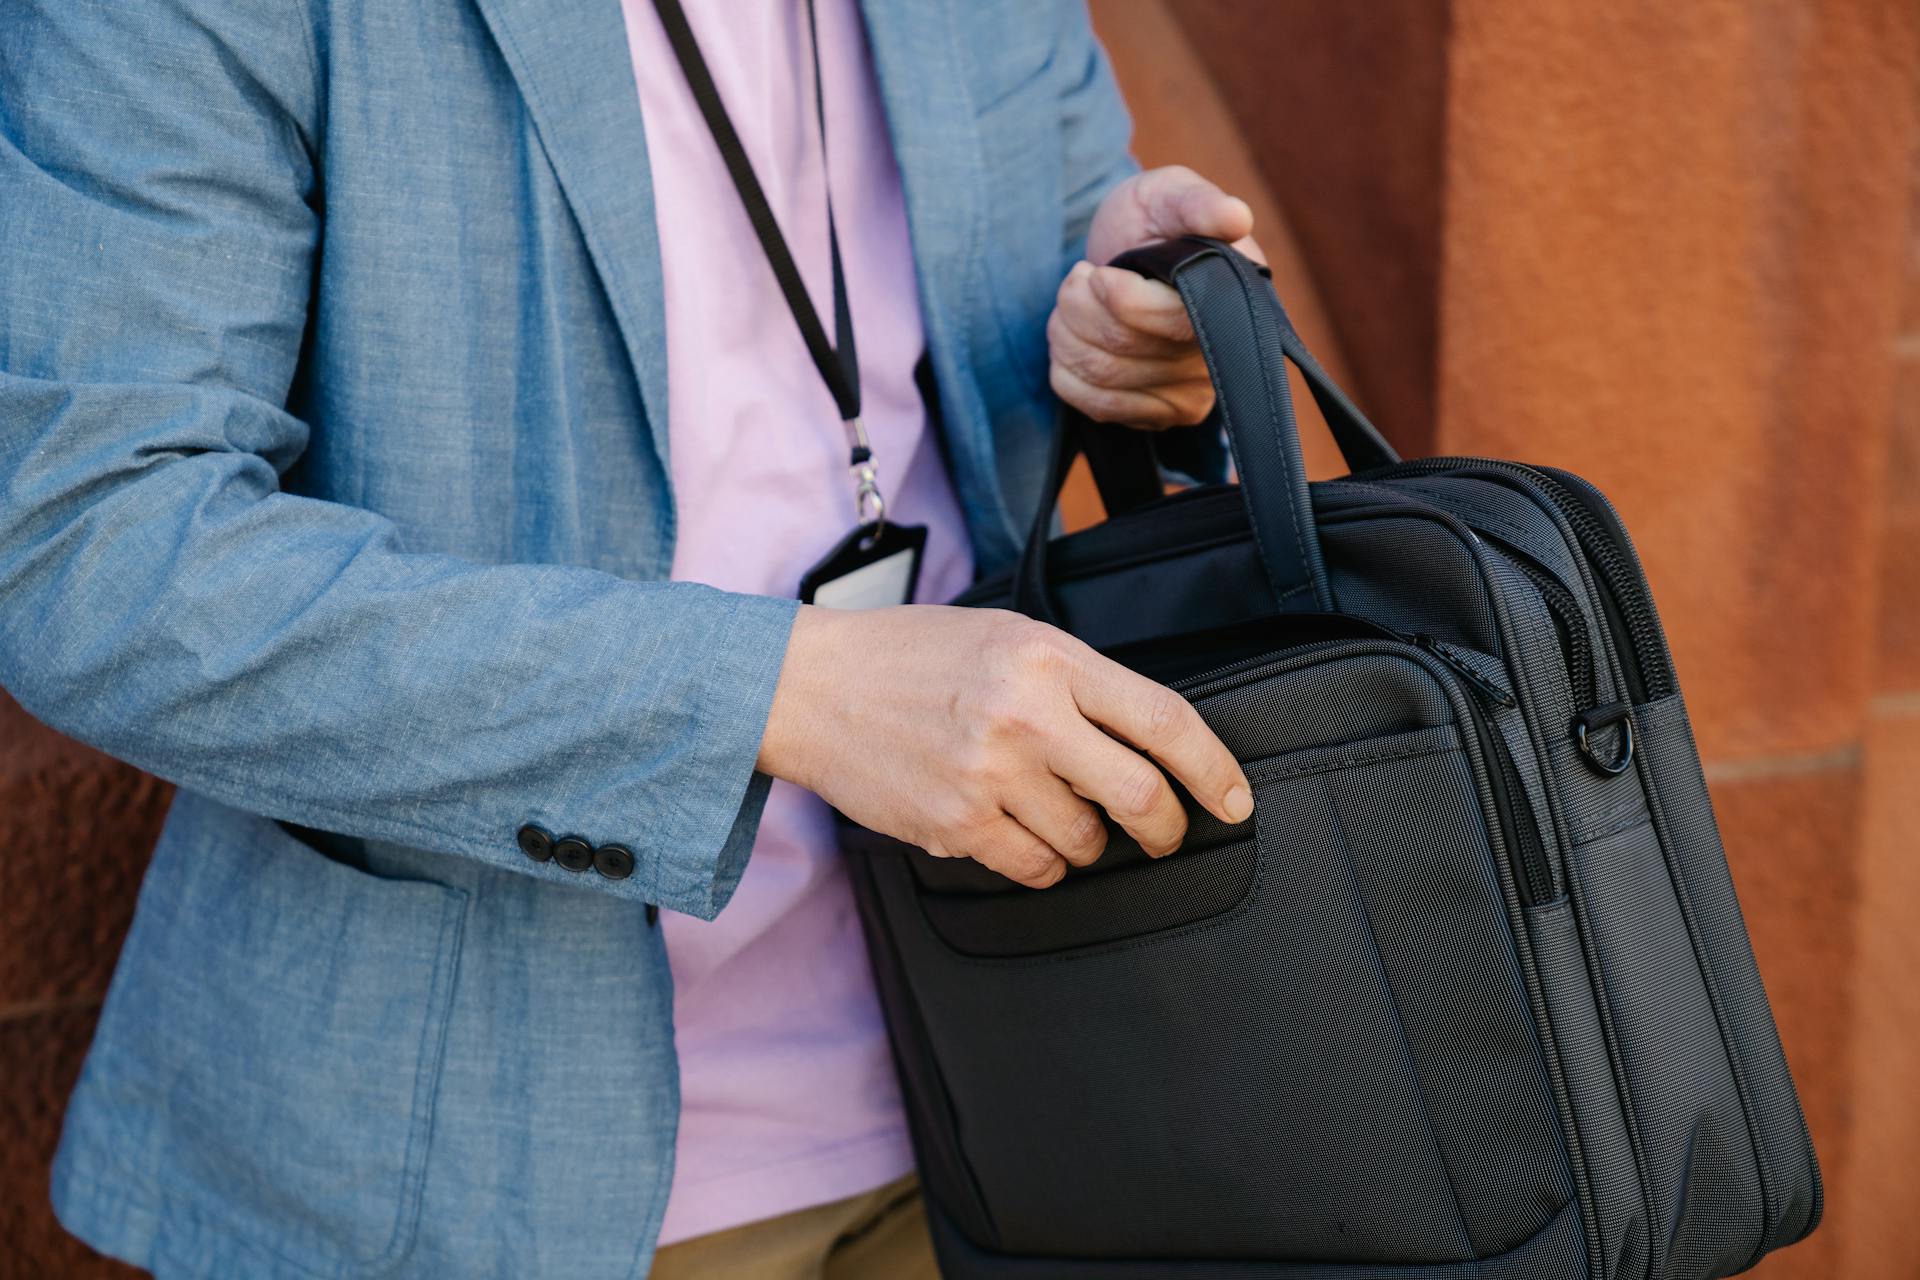 A man in blue suit holding a briefcase | Source: Pexels